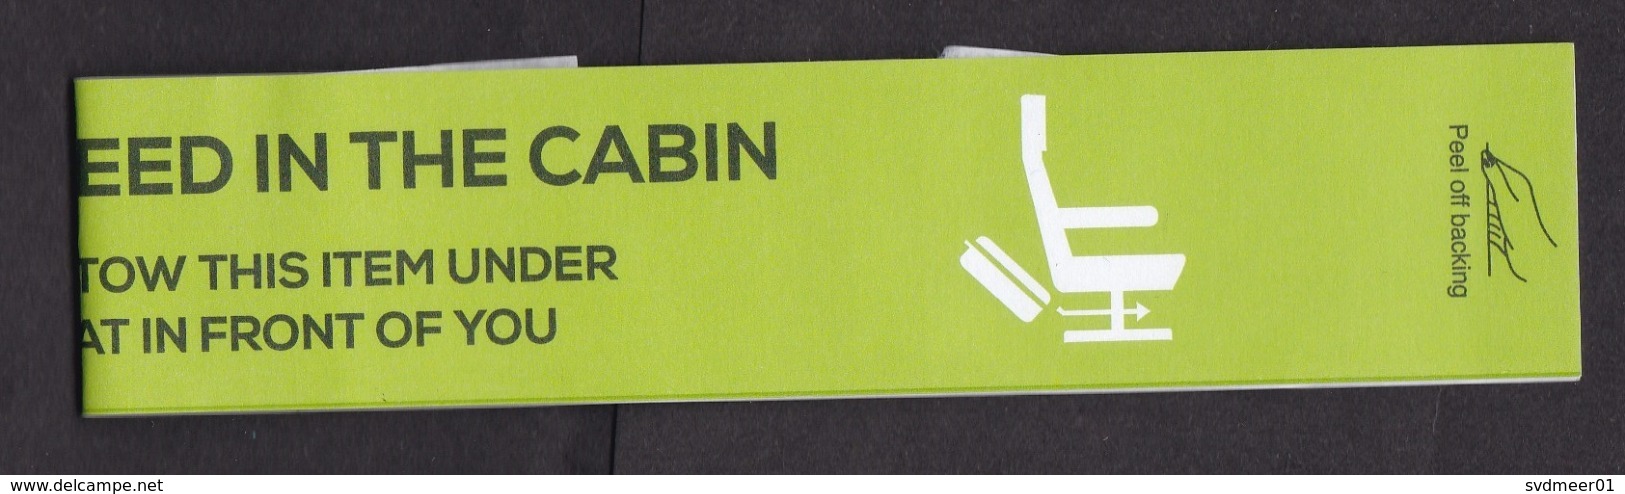 Transavia Airlines, Netherlands: Luggage Label, Baggage Tag, Cabin Baggage, Aviation (traces Of Use) - Aufklebschilder Und Gepäckbeschriftung